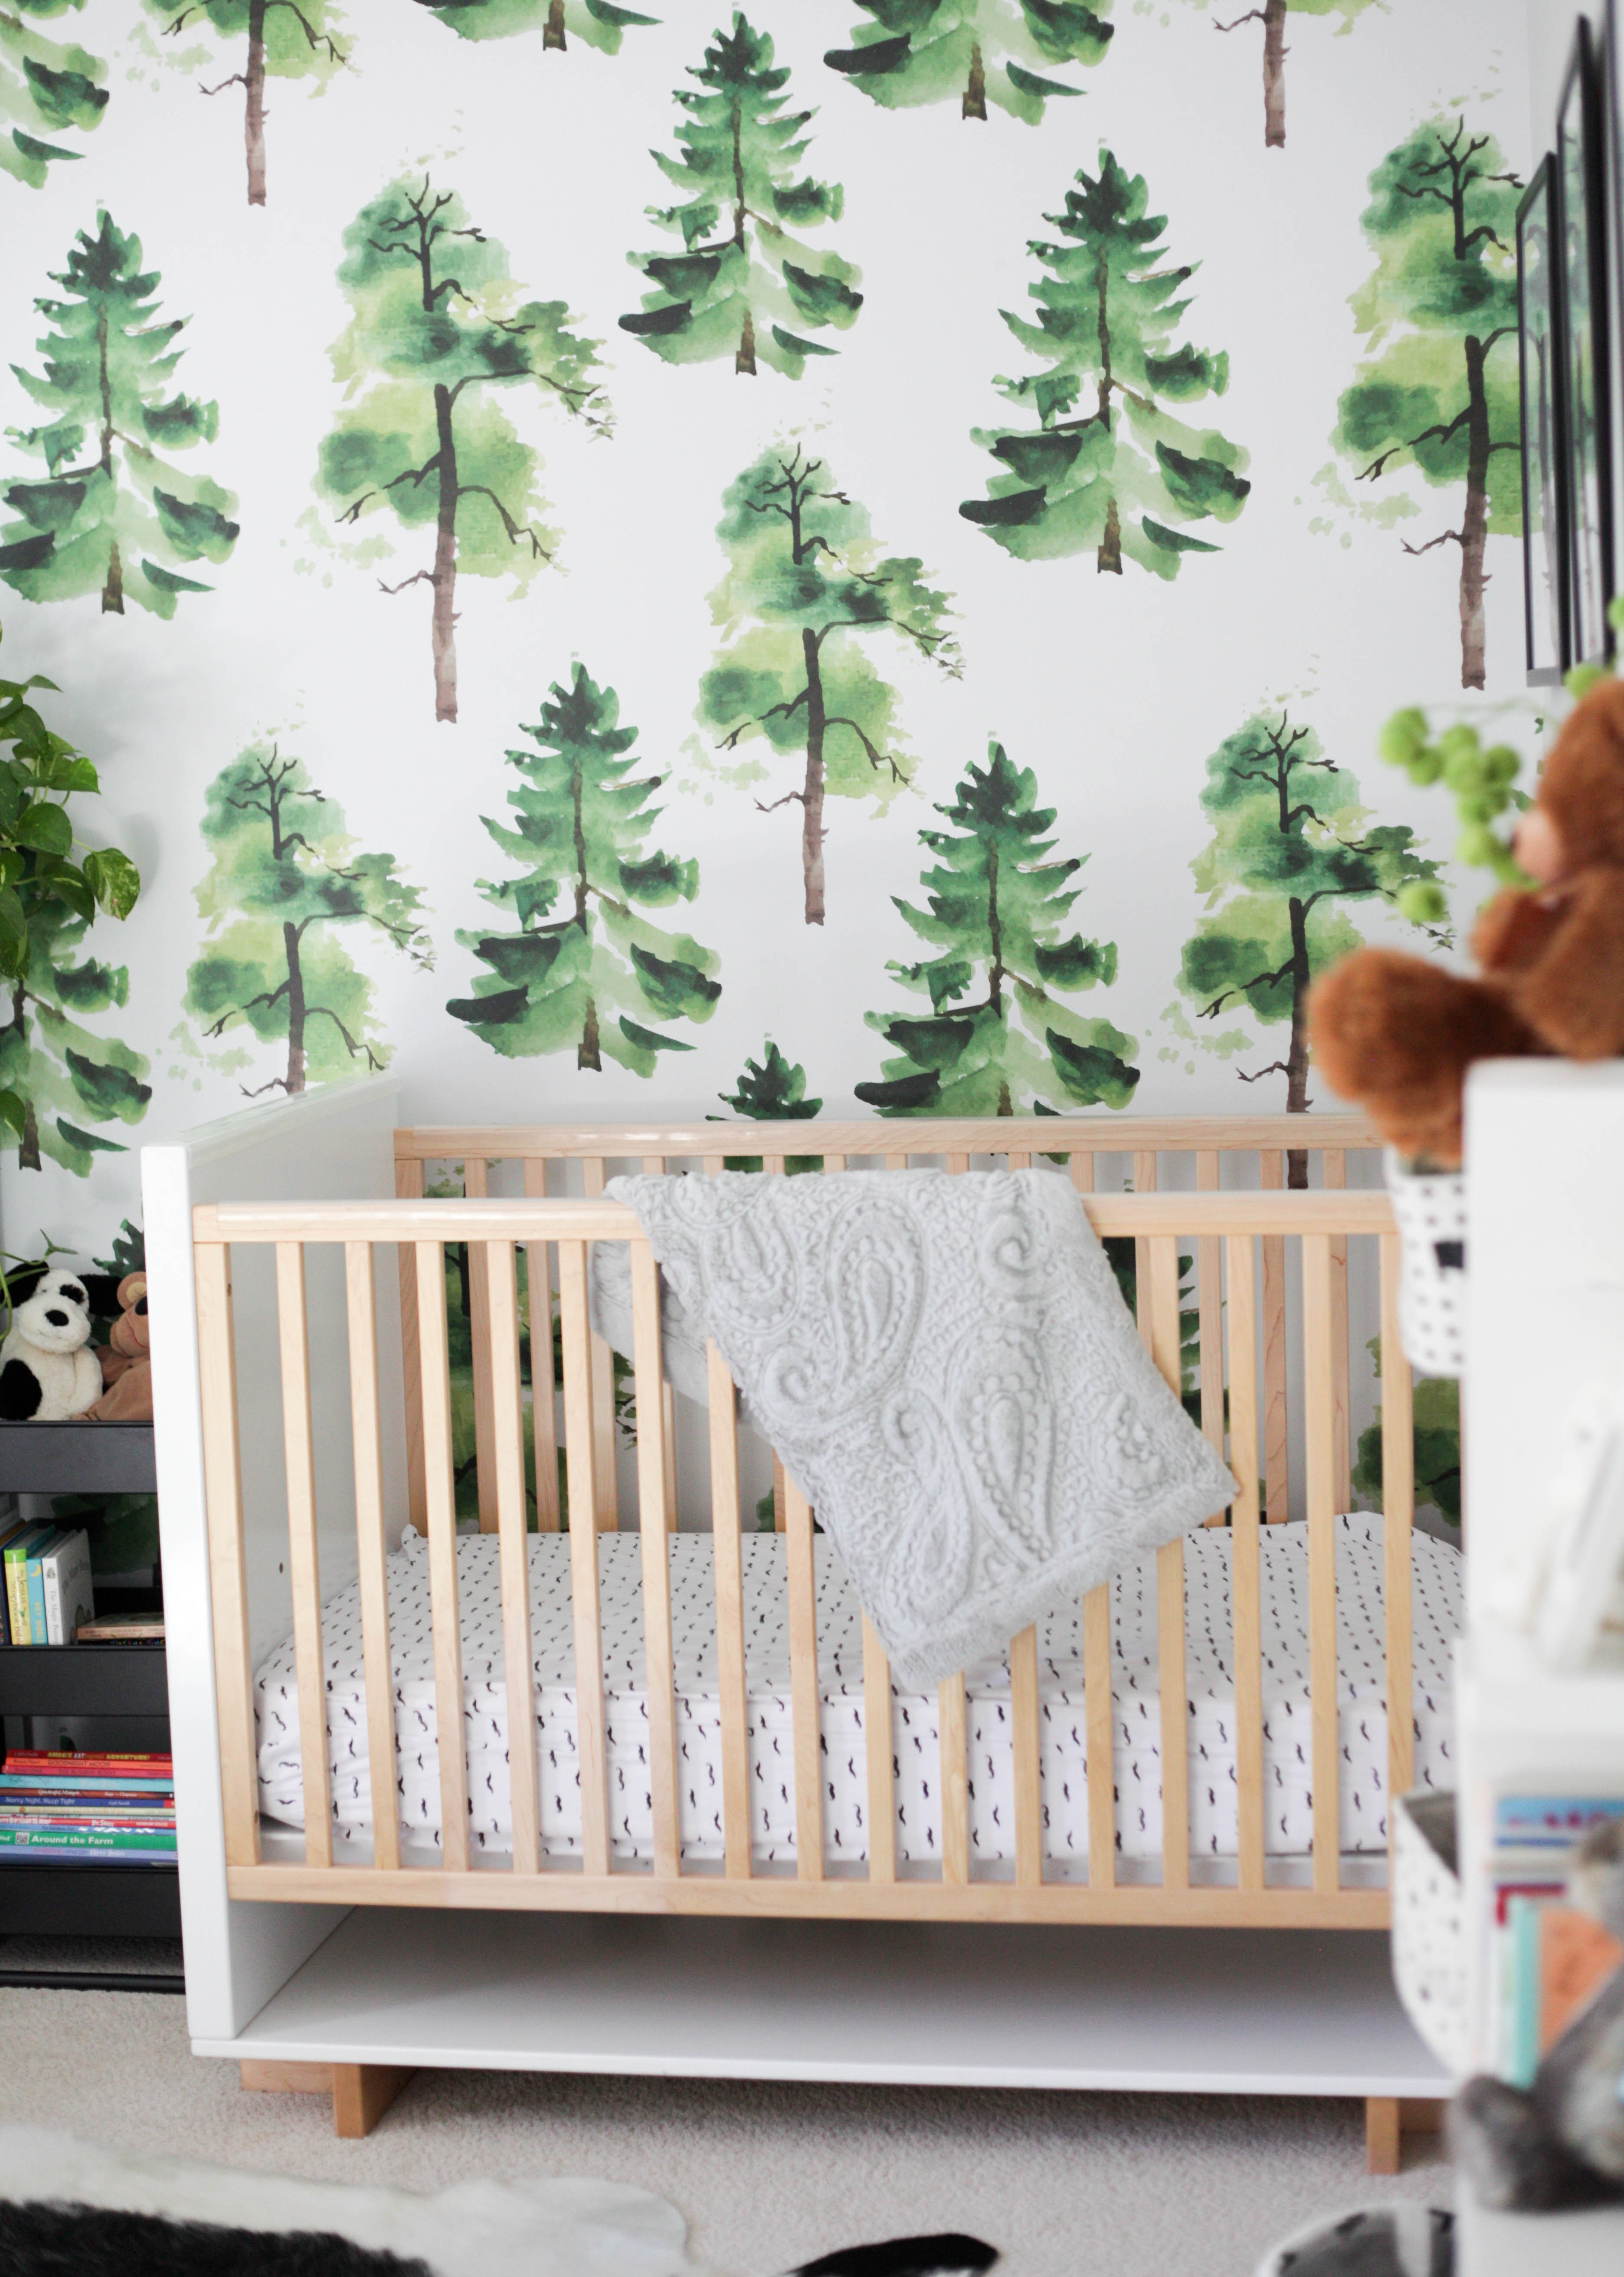 Eclectic + Playful Kid's Room - Project Nursery